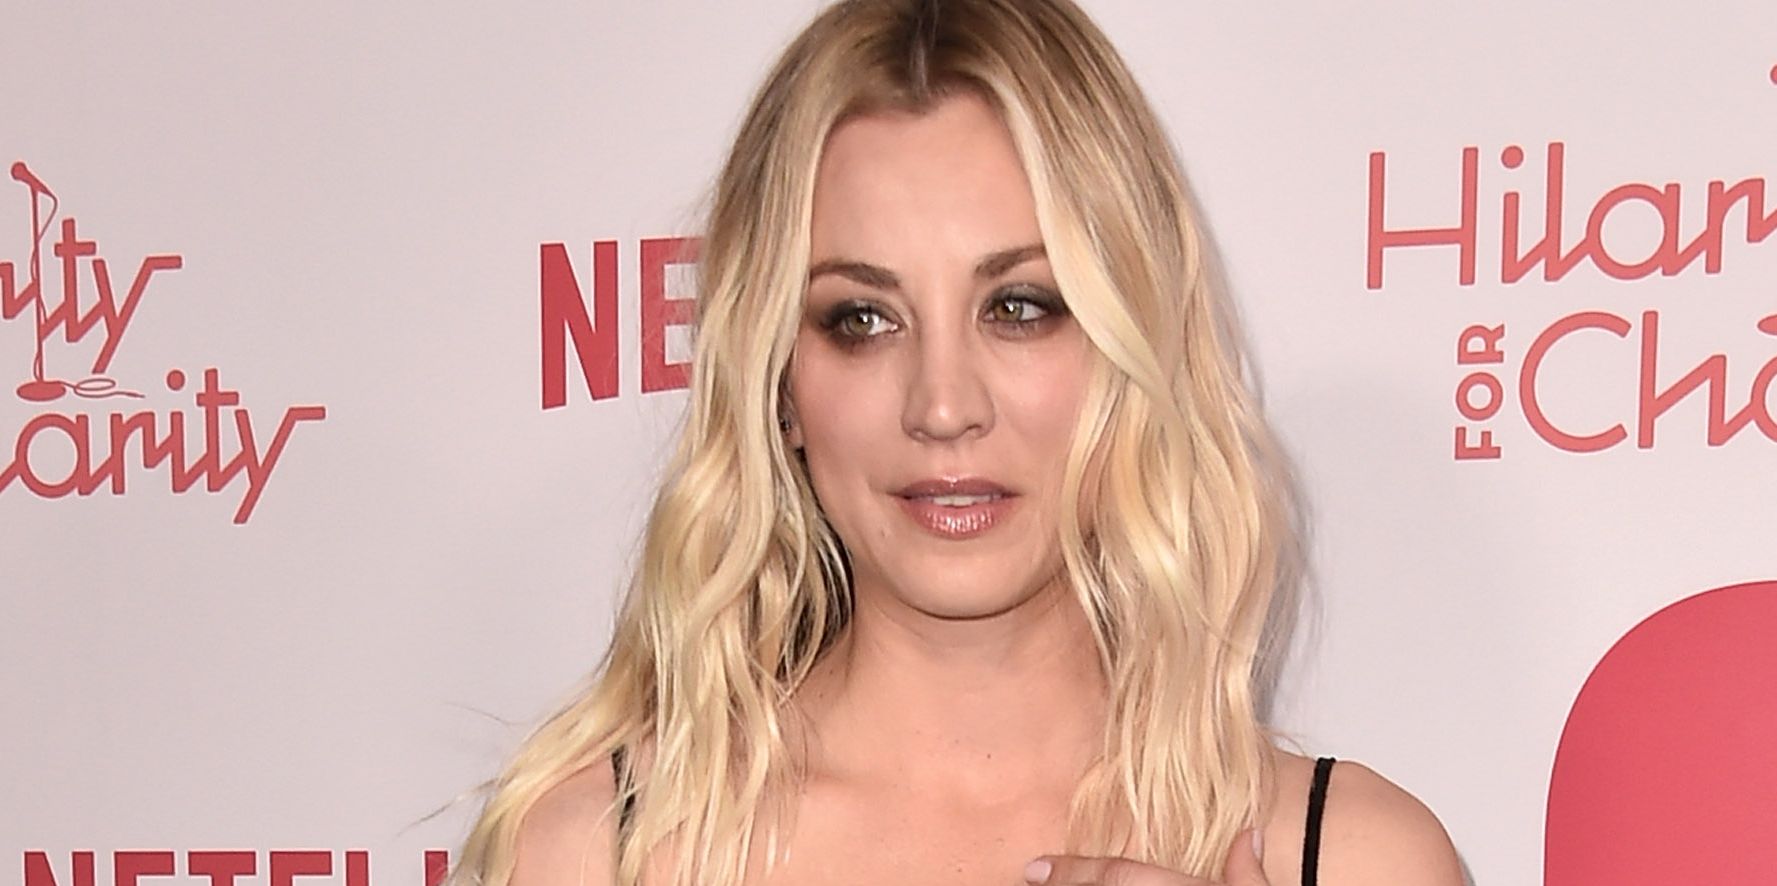 barrie ford recommends Kaley Cuoco Breast Uncensored